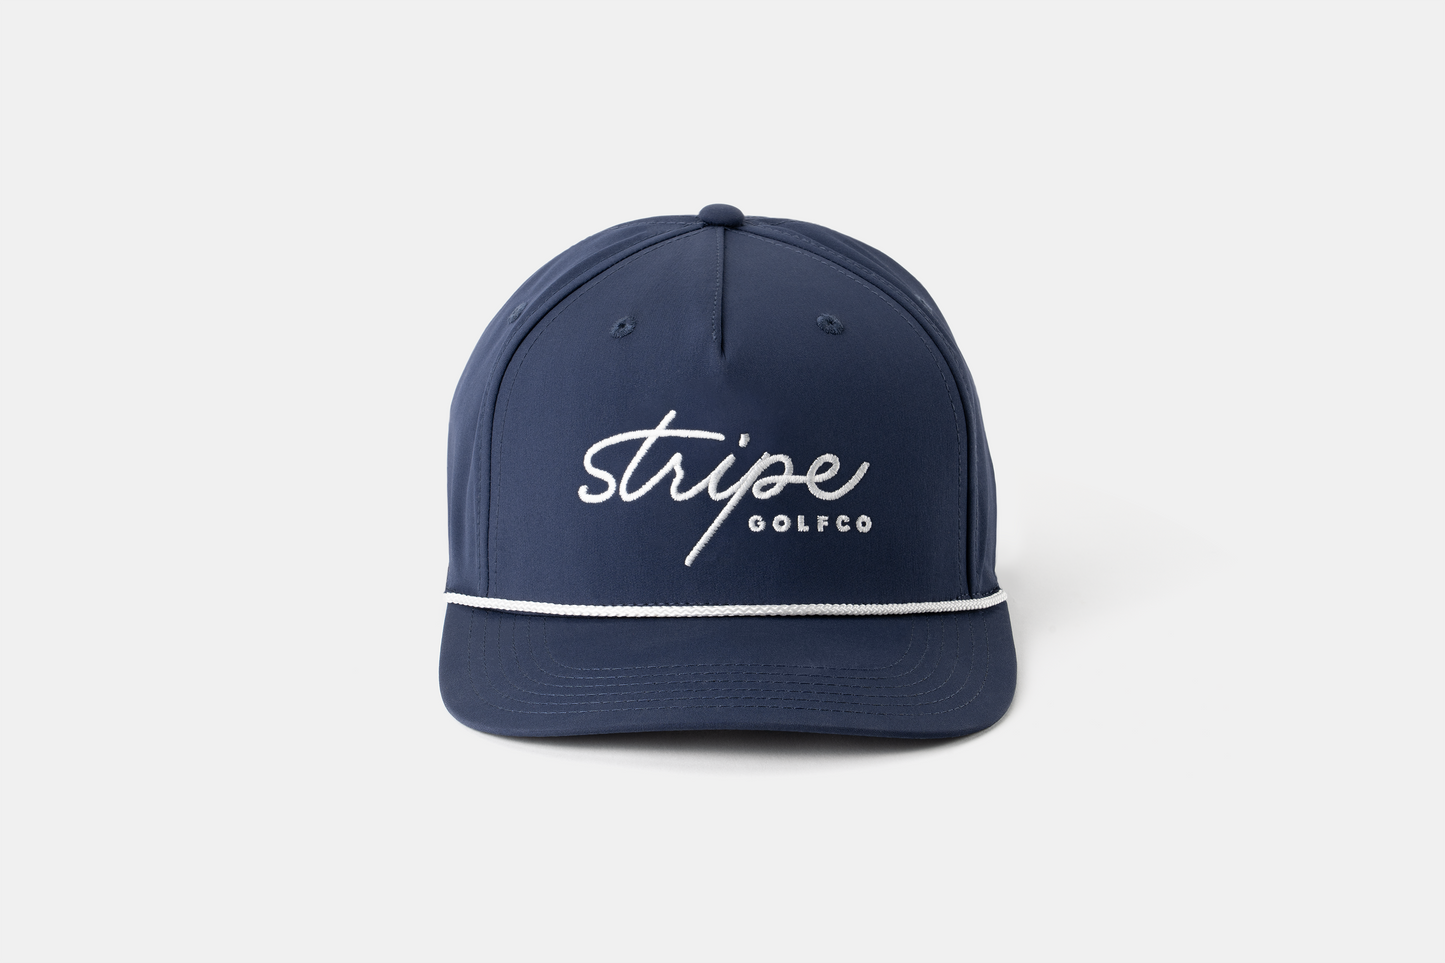 Stripe Golf Co. Rope - Navy and White